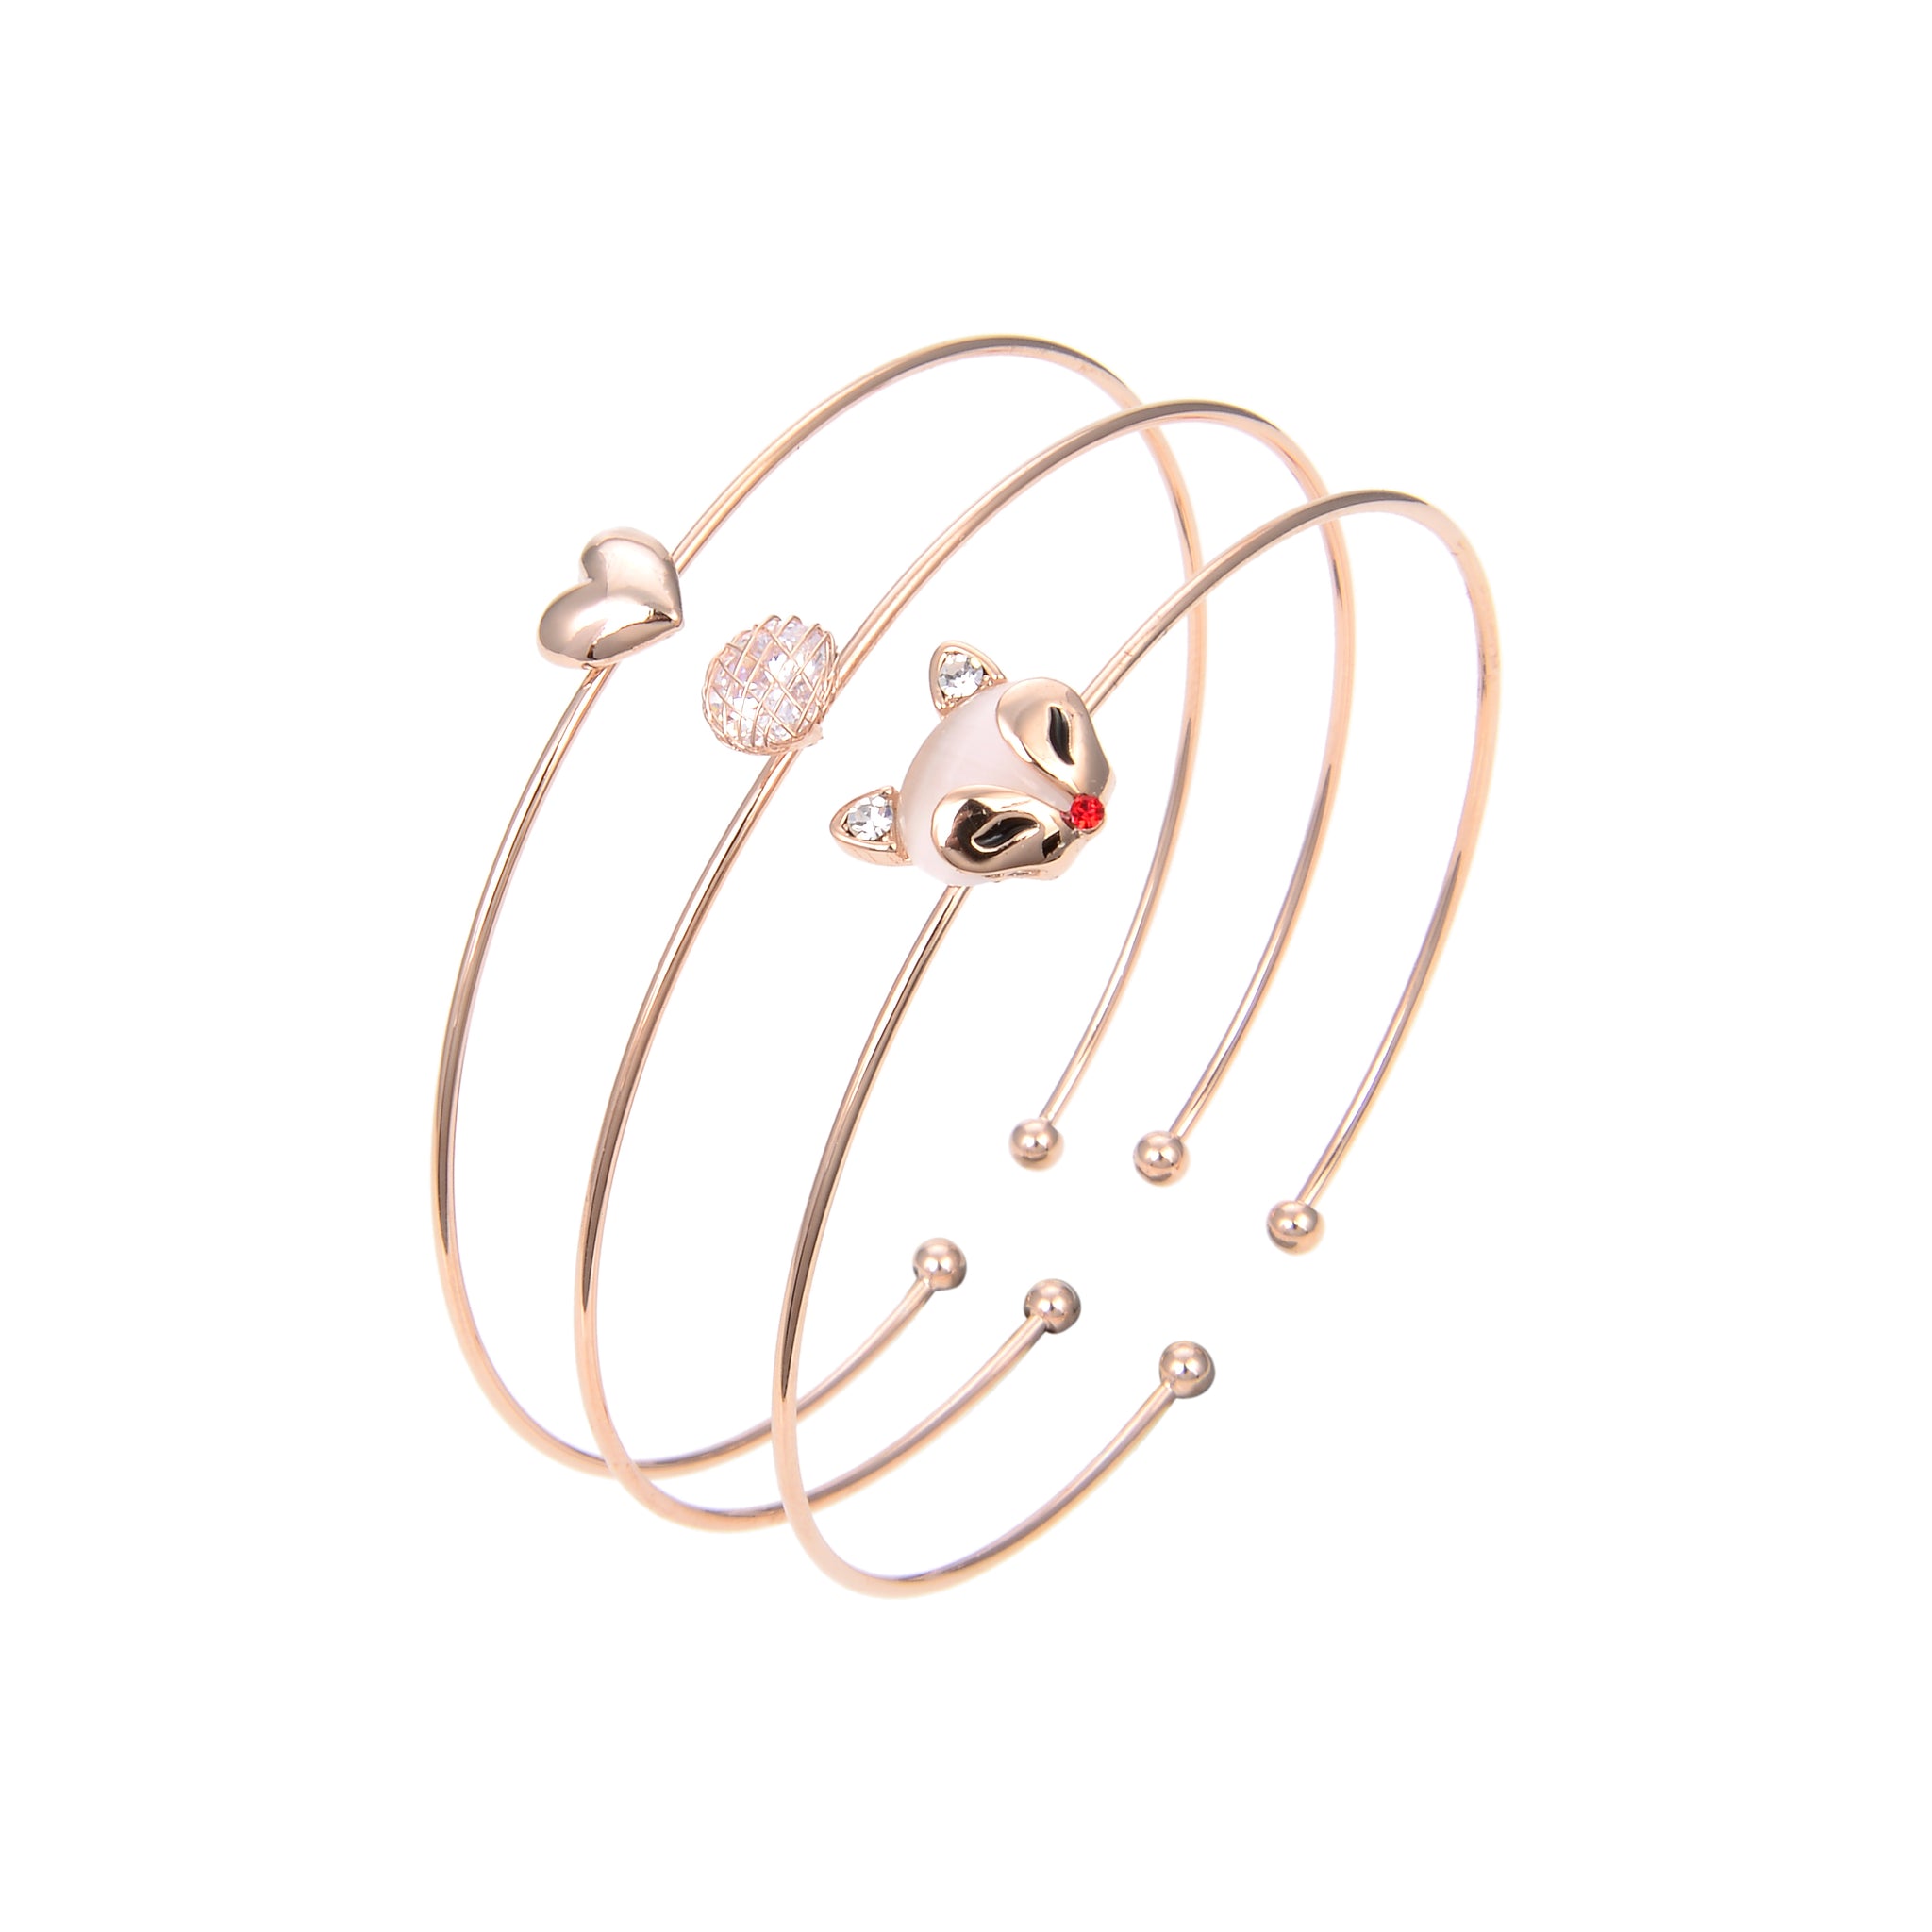 Rose Gold Plated Cubic Zirconia Bangle Bracelet, Rose Gold Plated CZ Bangle Bracelet